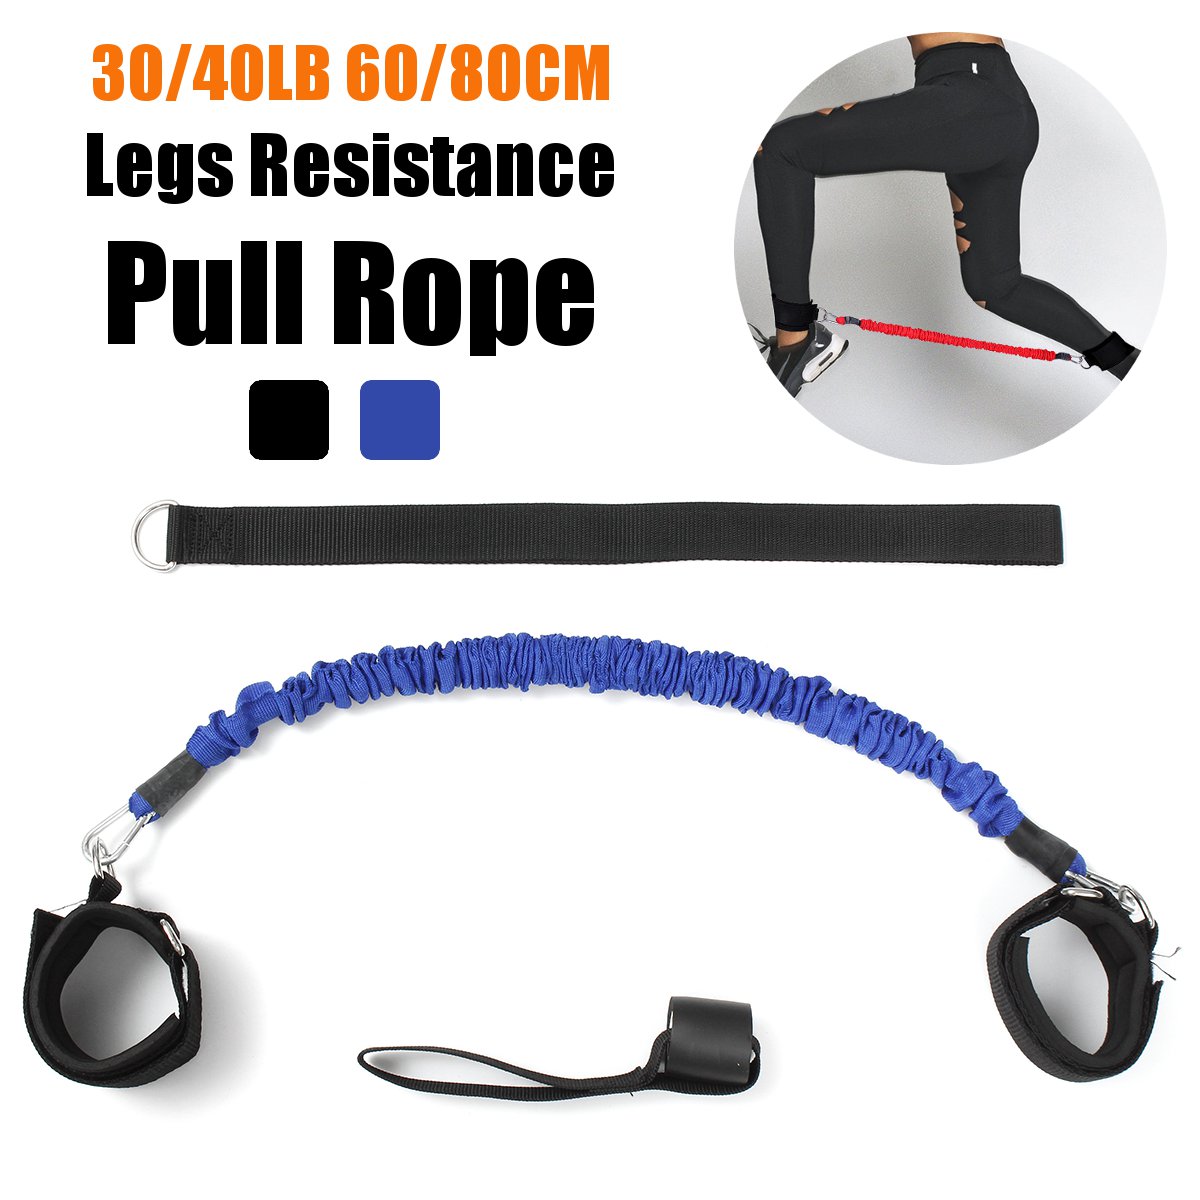 3040LB-Legs-Resistance-Pull-Rope-Exercise-Tools-Expander-Strength-Fitness-Bands-1637119-1